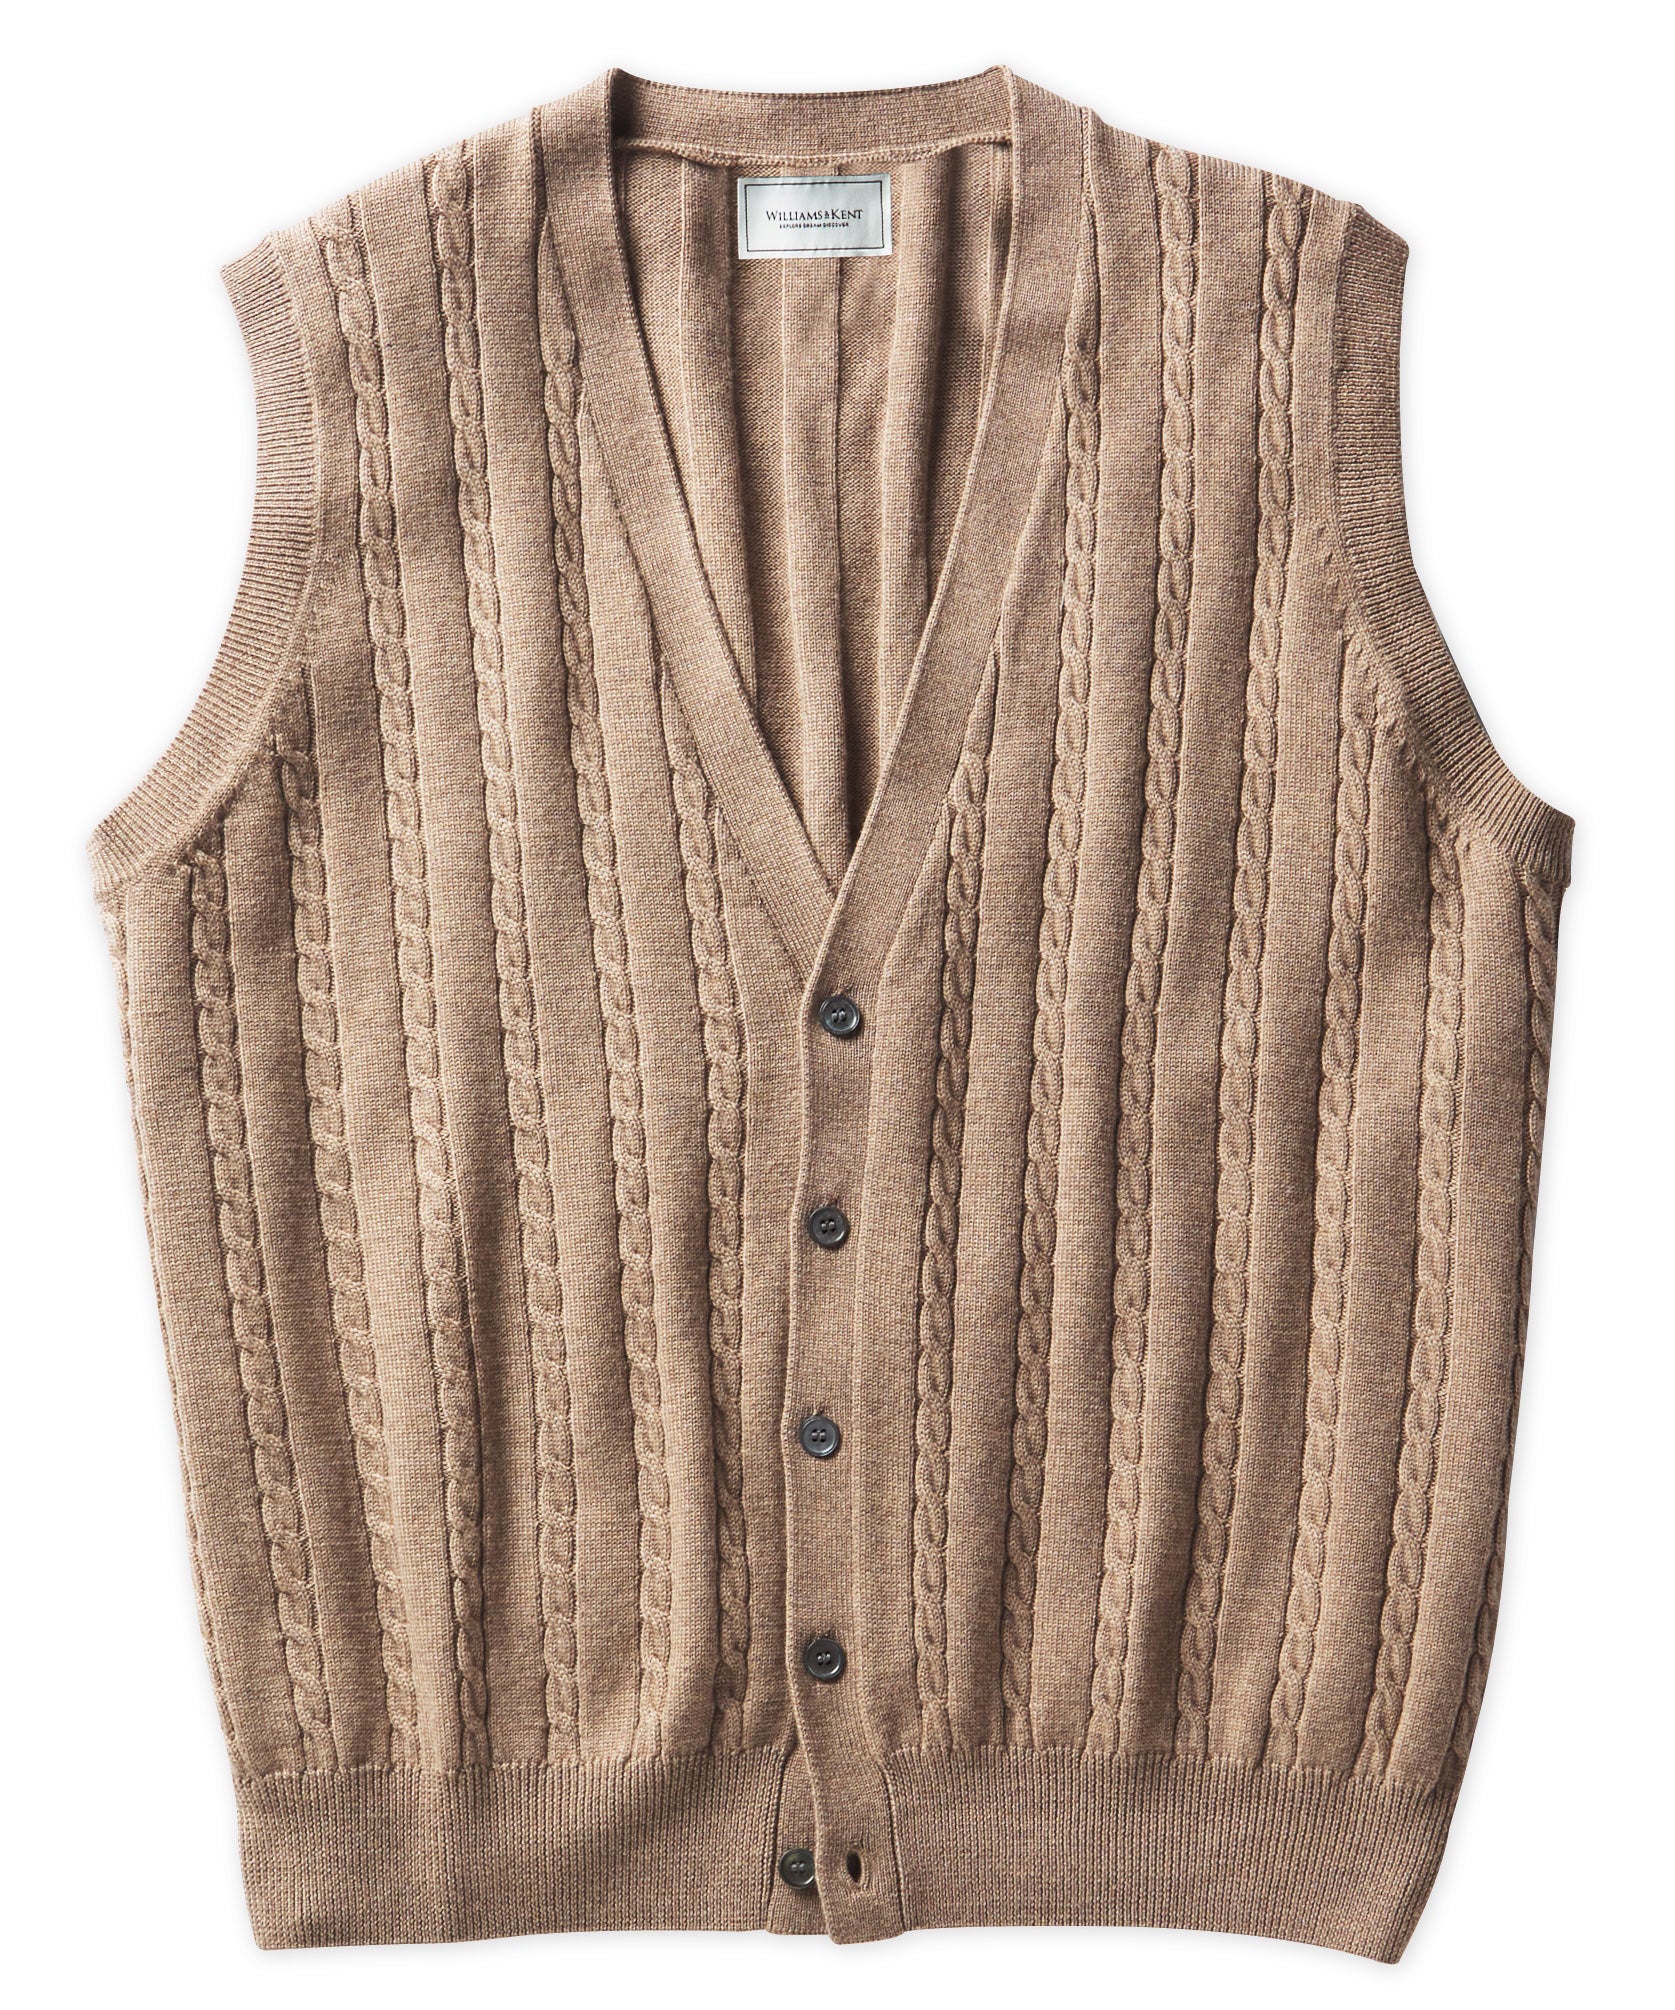 Mew Mew Rommelig Verfrissend Italian Merino Wool Button-Front Cable Sweater Vest - Williams & Kent